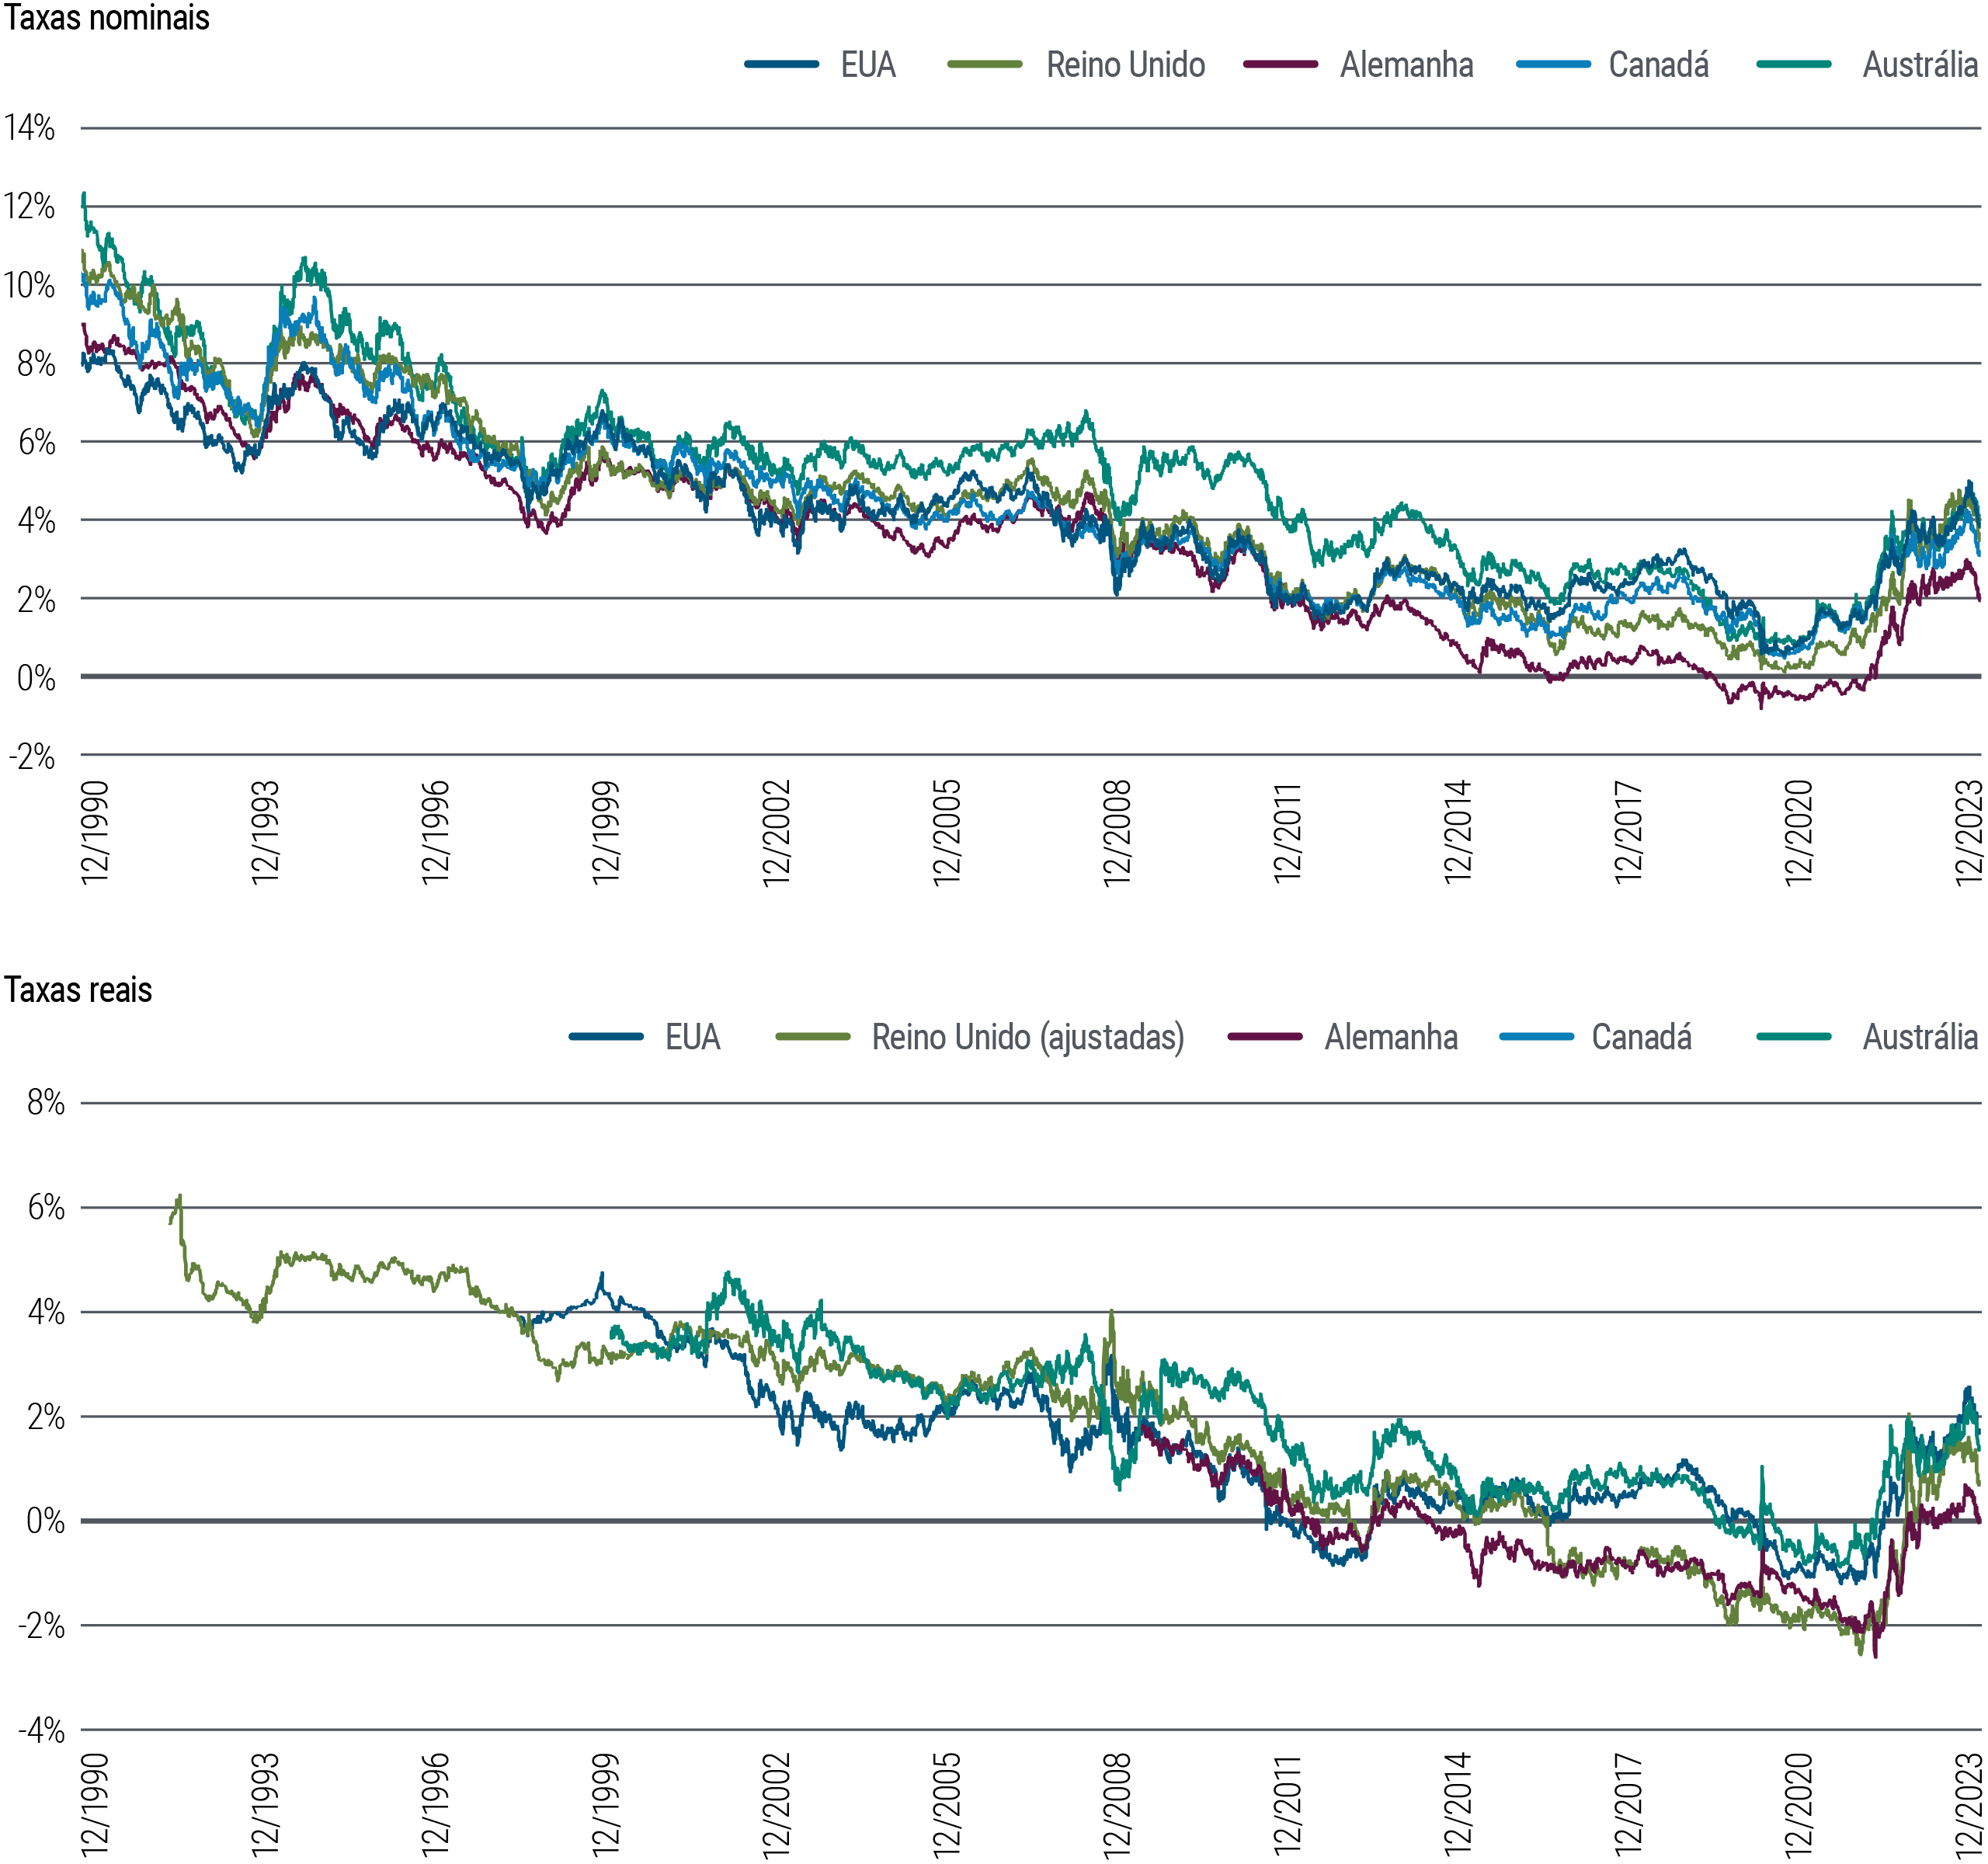 Figure 3 is two line charts. The first chart shows 10-year nominal interest rates in 5 developed market countries (U.S., U.K., Germany, Canada, and Australia) from 1990 through December 2023. In that time frame, nominal yields fluctuated some but along a downward trend from about 9%–14% in 1990 to a low hovering around zero in 2020, around the pandemic. They have since risen into a range from about 2% to just below 4%. The second chart shows 10-year real rates for the same countries over the same time frame. Real rates generally and gradually dropped for much of that period, then rose rapidly following the pandemic, slowing those gains more recently but still off their lows and in a range of 0.1%–1.7%. Data source is PIMCO and Bloomberg as of 29 December 2023. 